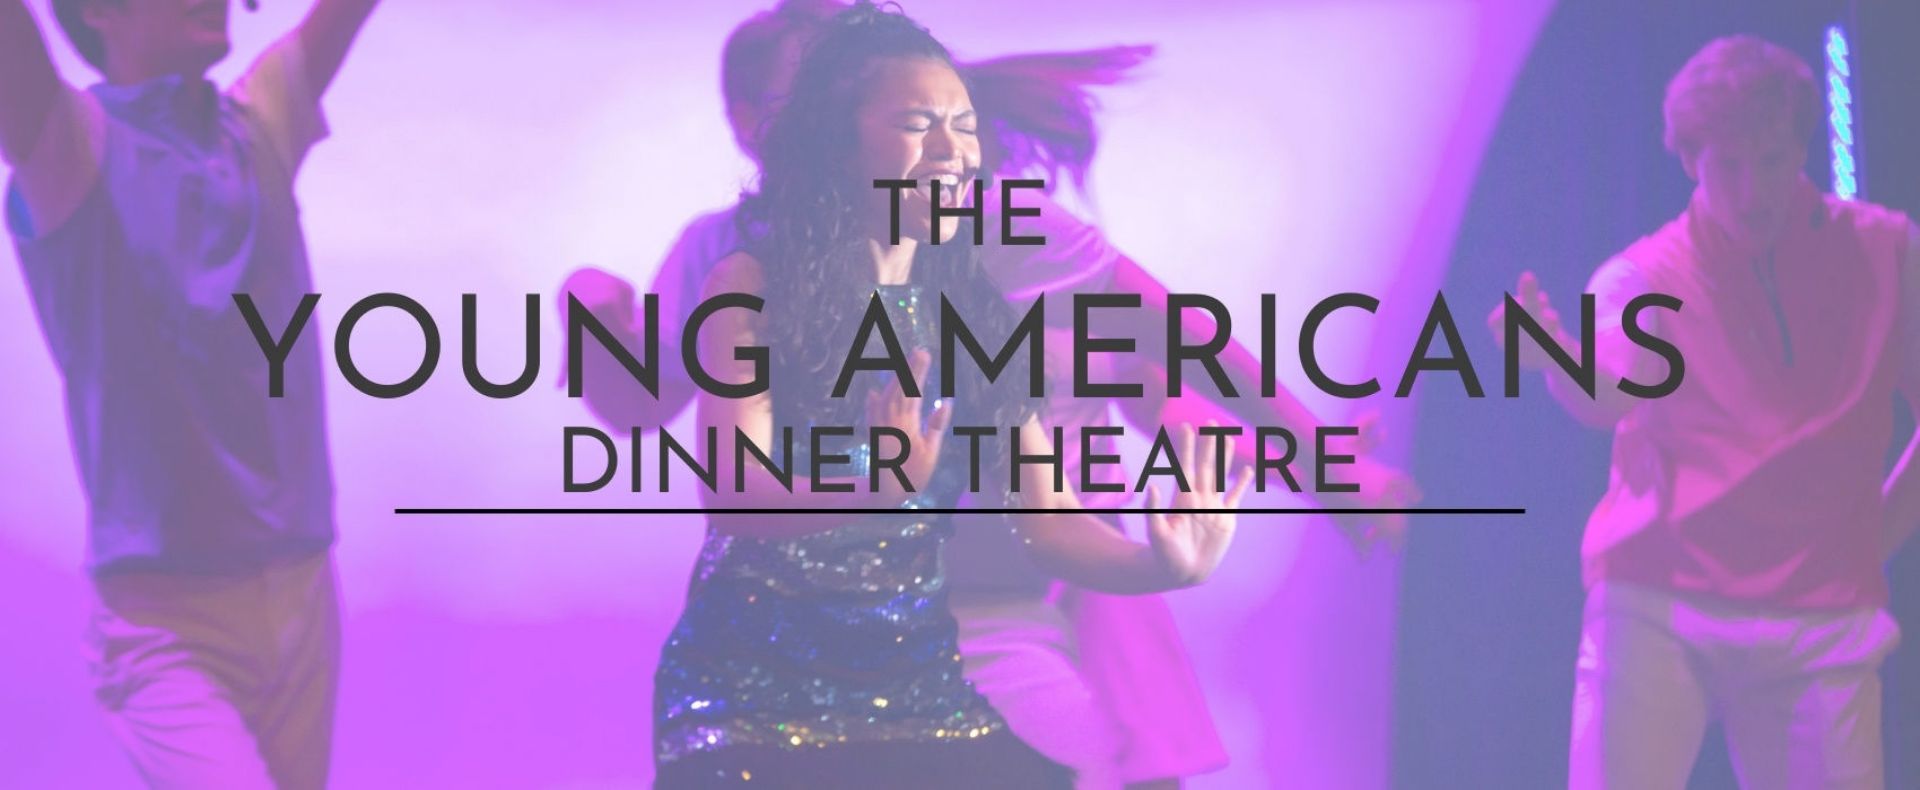 The Young Americans Dinner Theatre at The Highlands